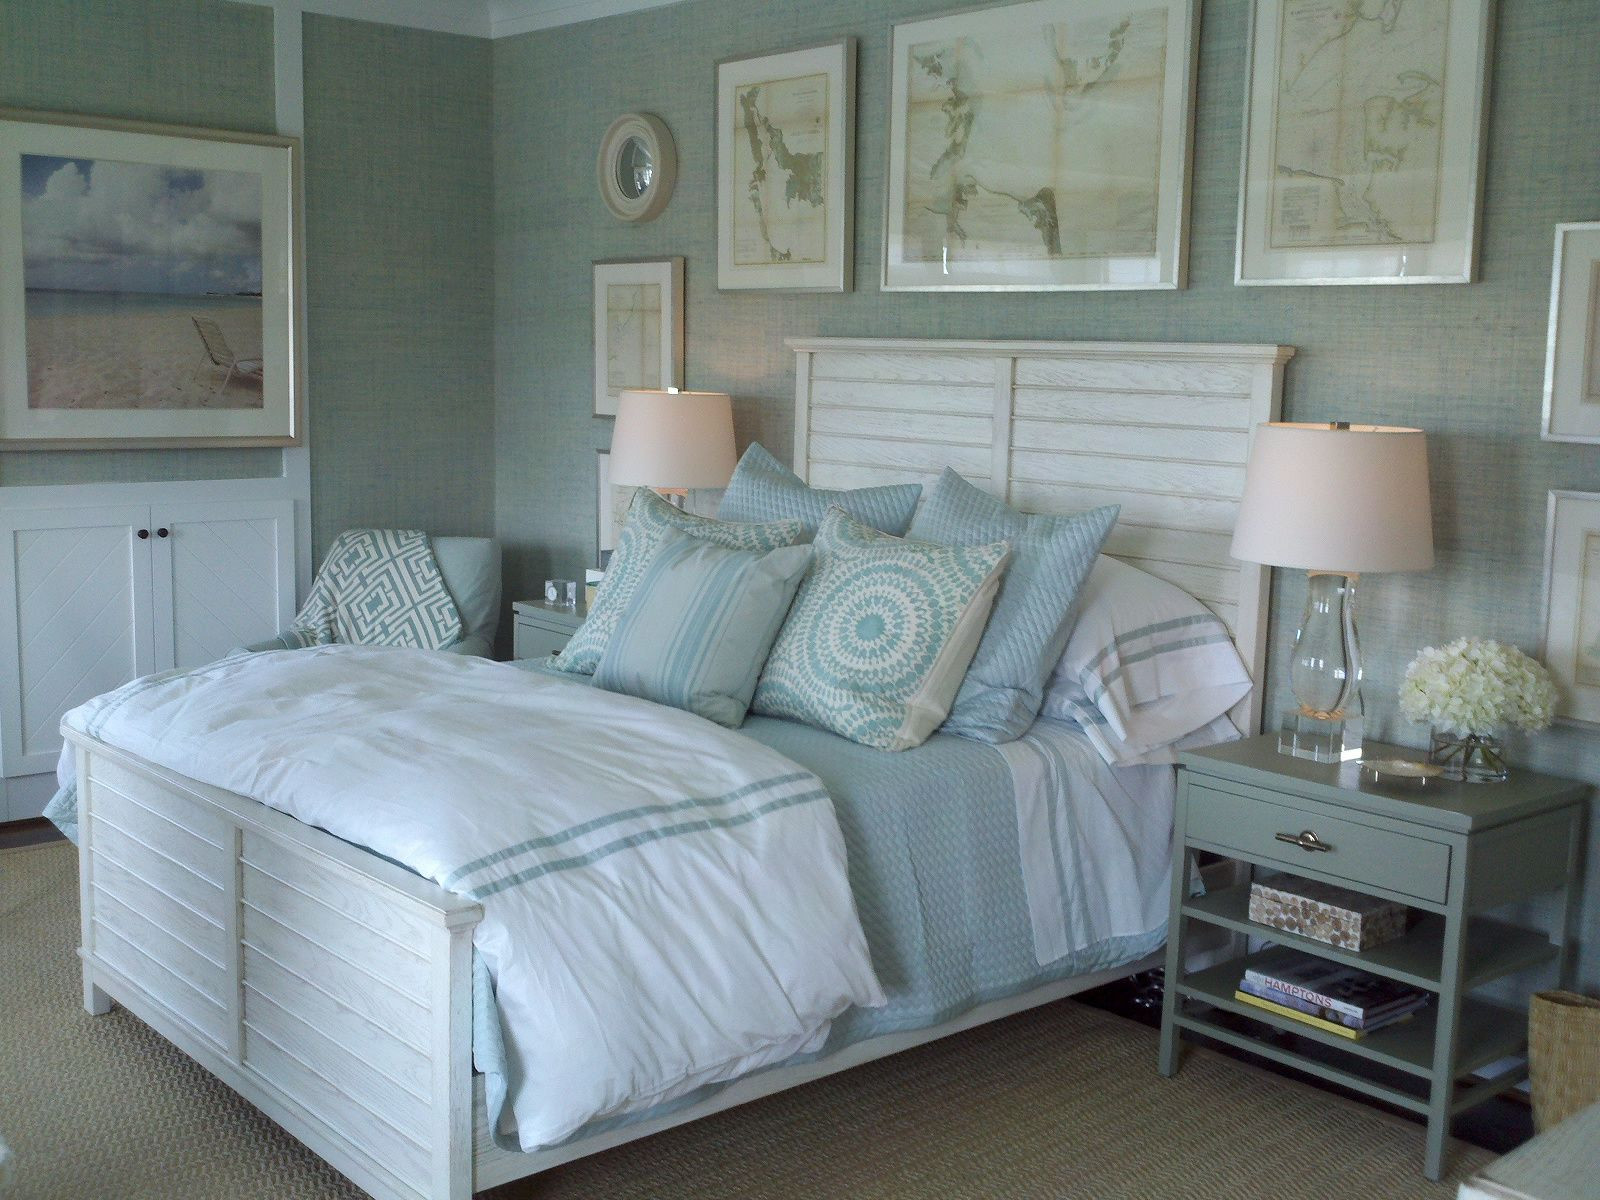 Great Bedroom Colors
 great bedroom for a beach house My favorite sea glass